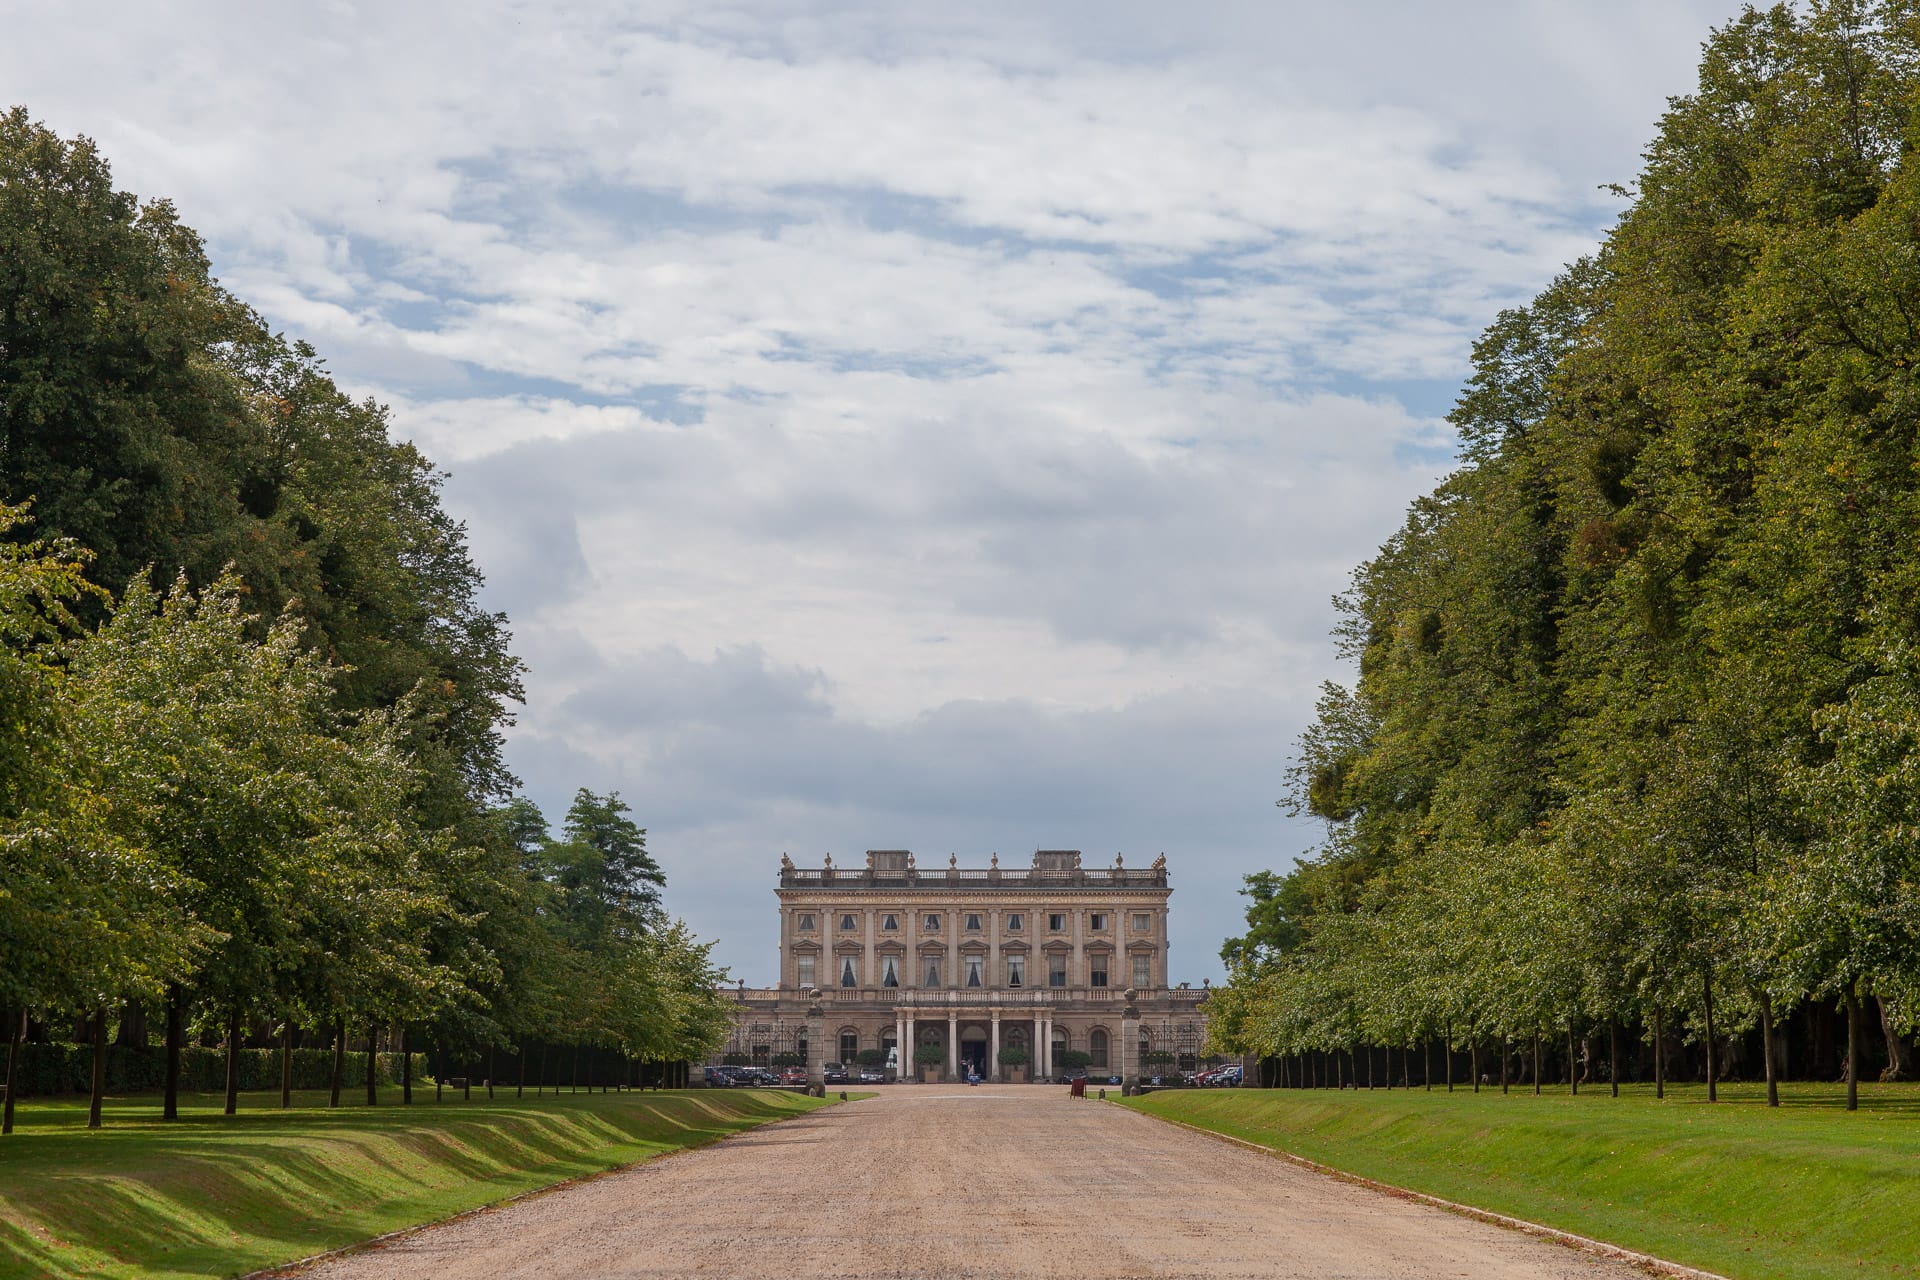 cliveden house along the drive